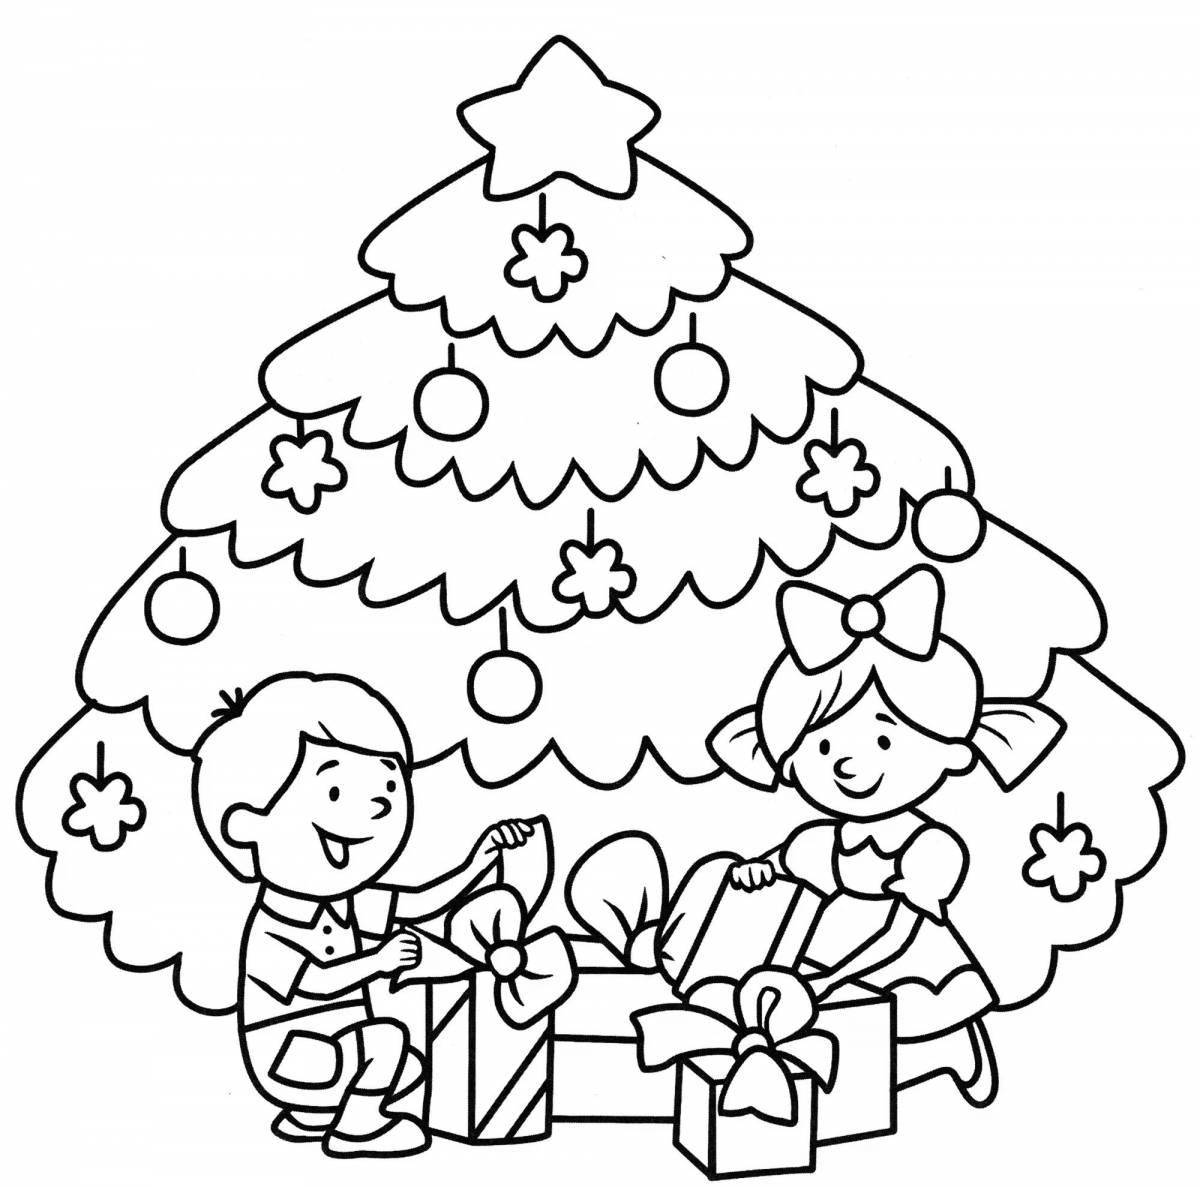 Amazing Christmas coloring book for 5 year olds